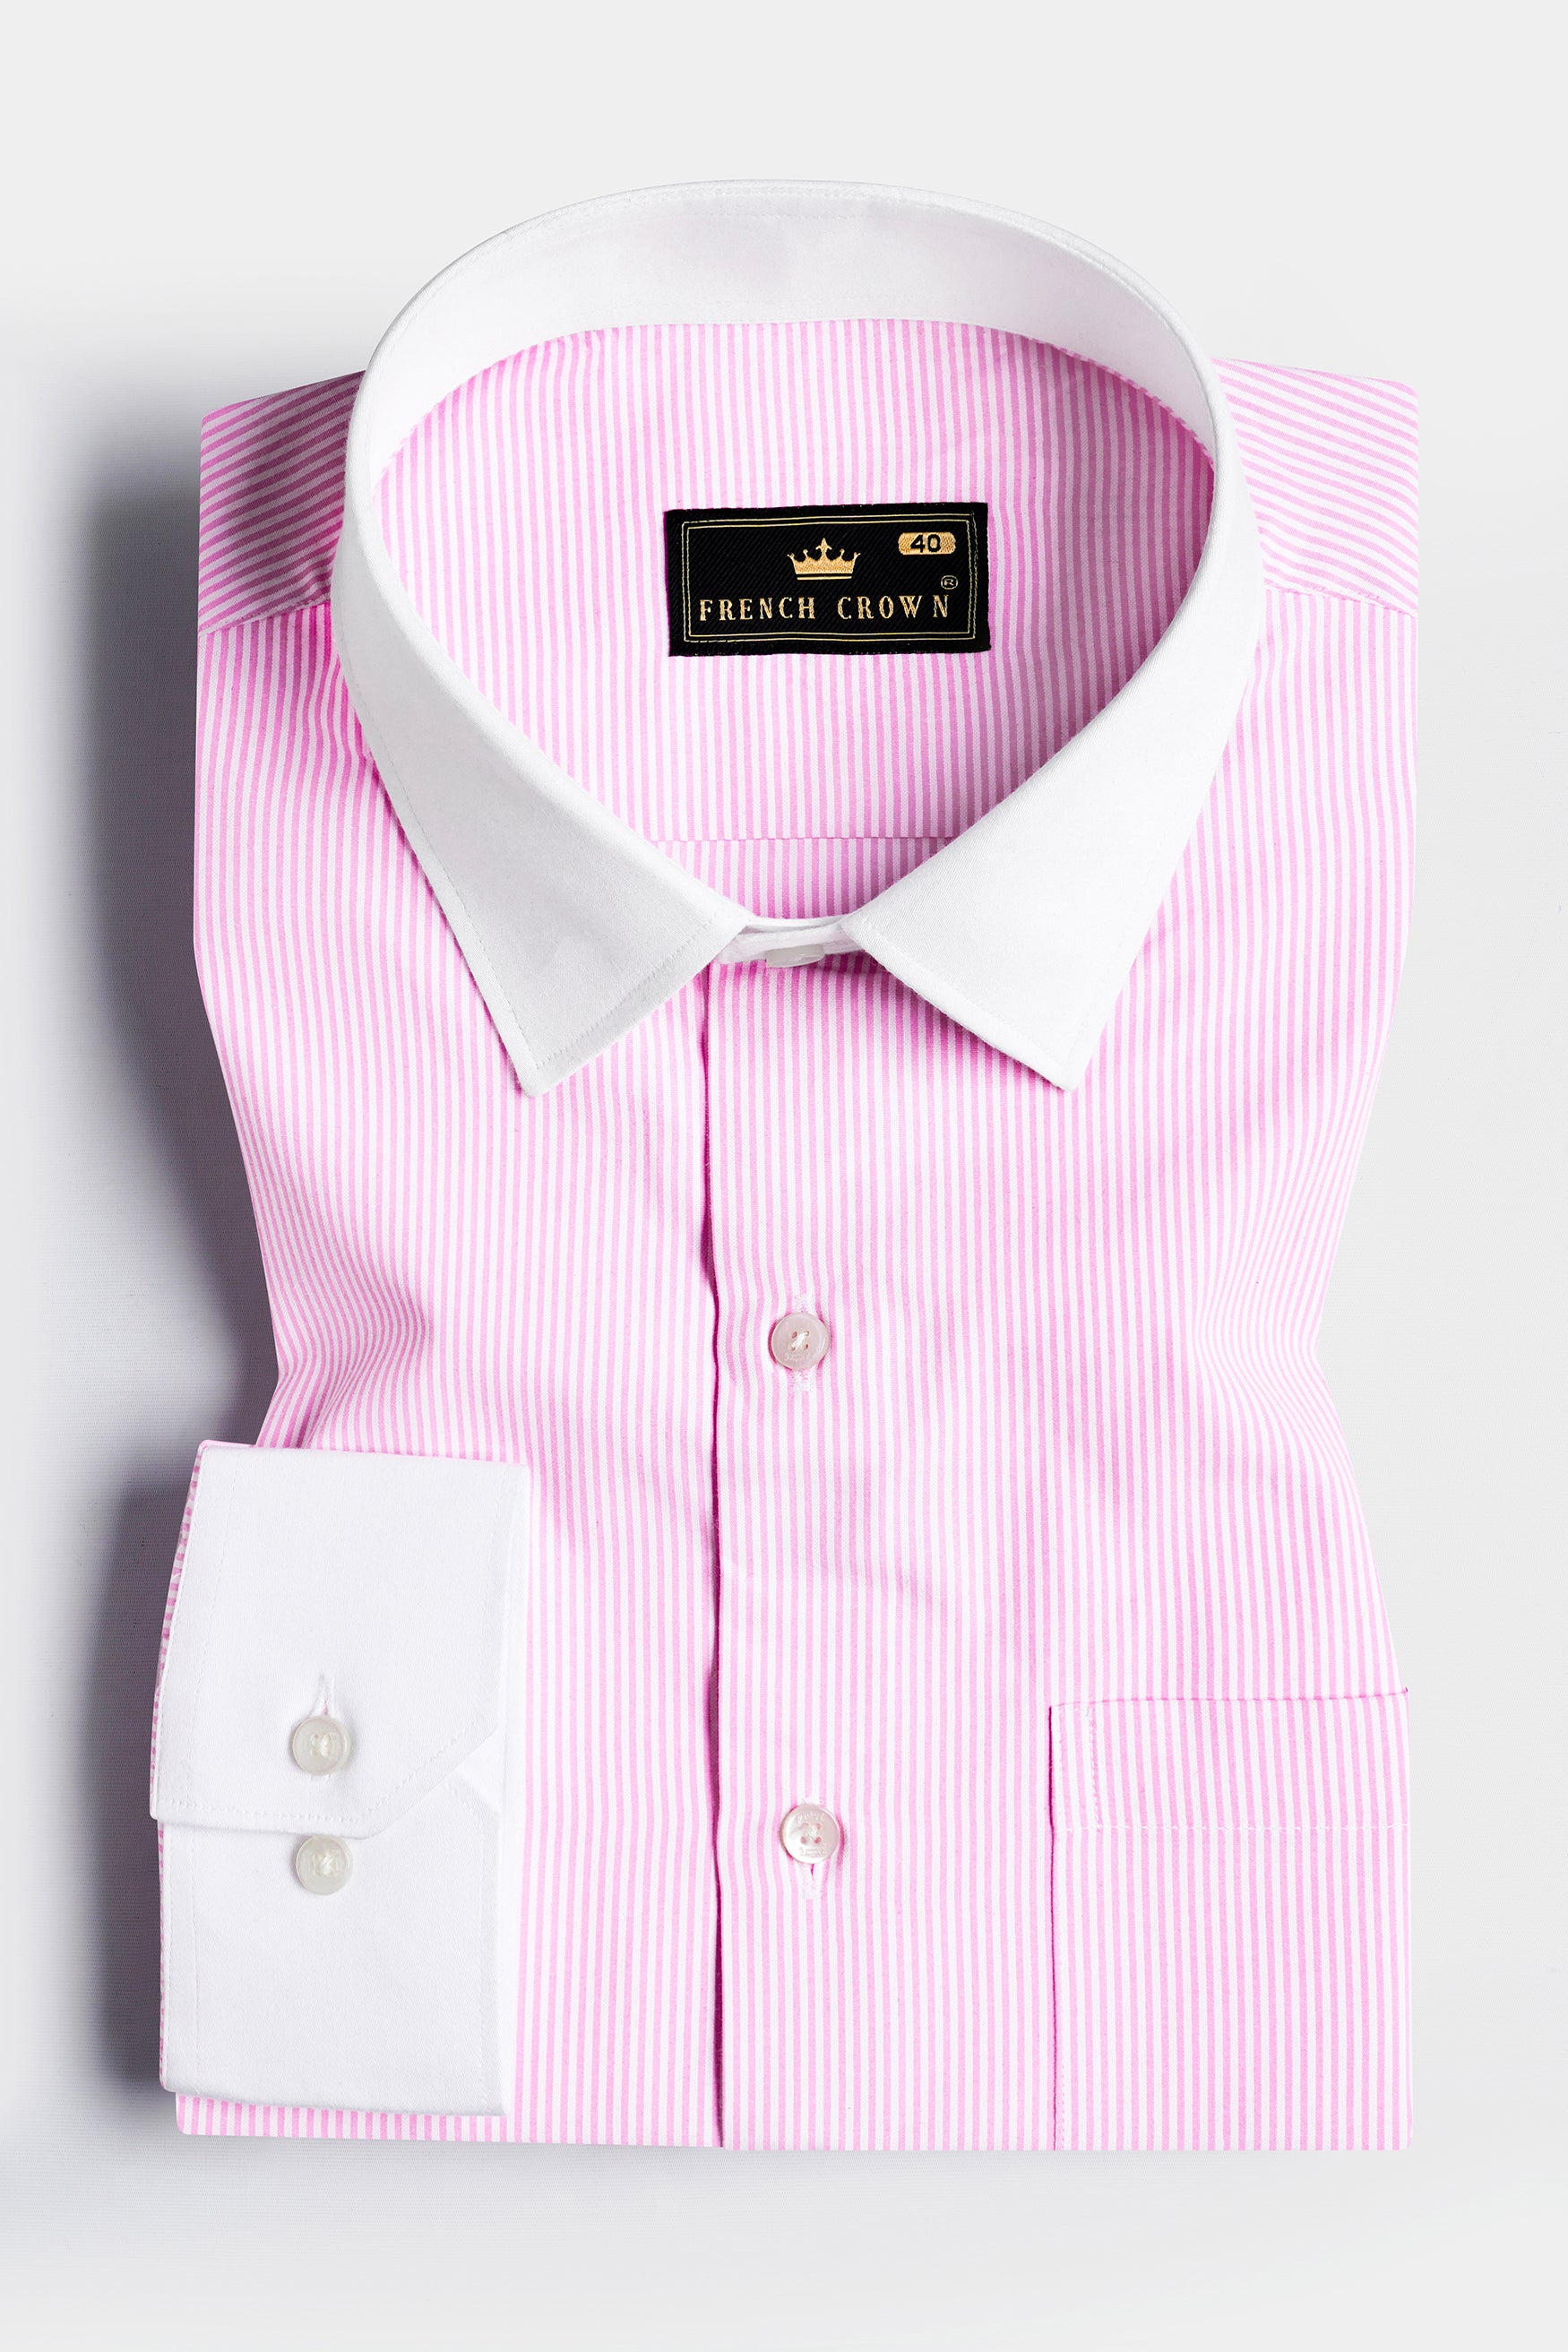 Melanie Pink and White Striped with White Cuffs and Collar Premium Cotton Shirt 11587-WCC-38, 11587-WCC-H-38, 11587-WCC-39, 11587-WCC-H-39, 11587-WCC-40, 11587-WCC-H-40, 11587-WCC-42, 11587-WCC-H-42, 11587-WCC-44, 11587-WCC-H-44, 11587-WCC-46, 11587-WCC-H-46, 11587-WCC-48, 11587-WCC-H-48, 11587-WCC-50, 11587-WCC-H-50, 11587-WCC-52, 11587-WCC-H-52